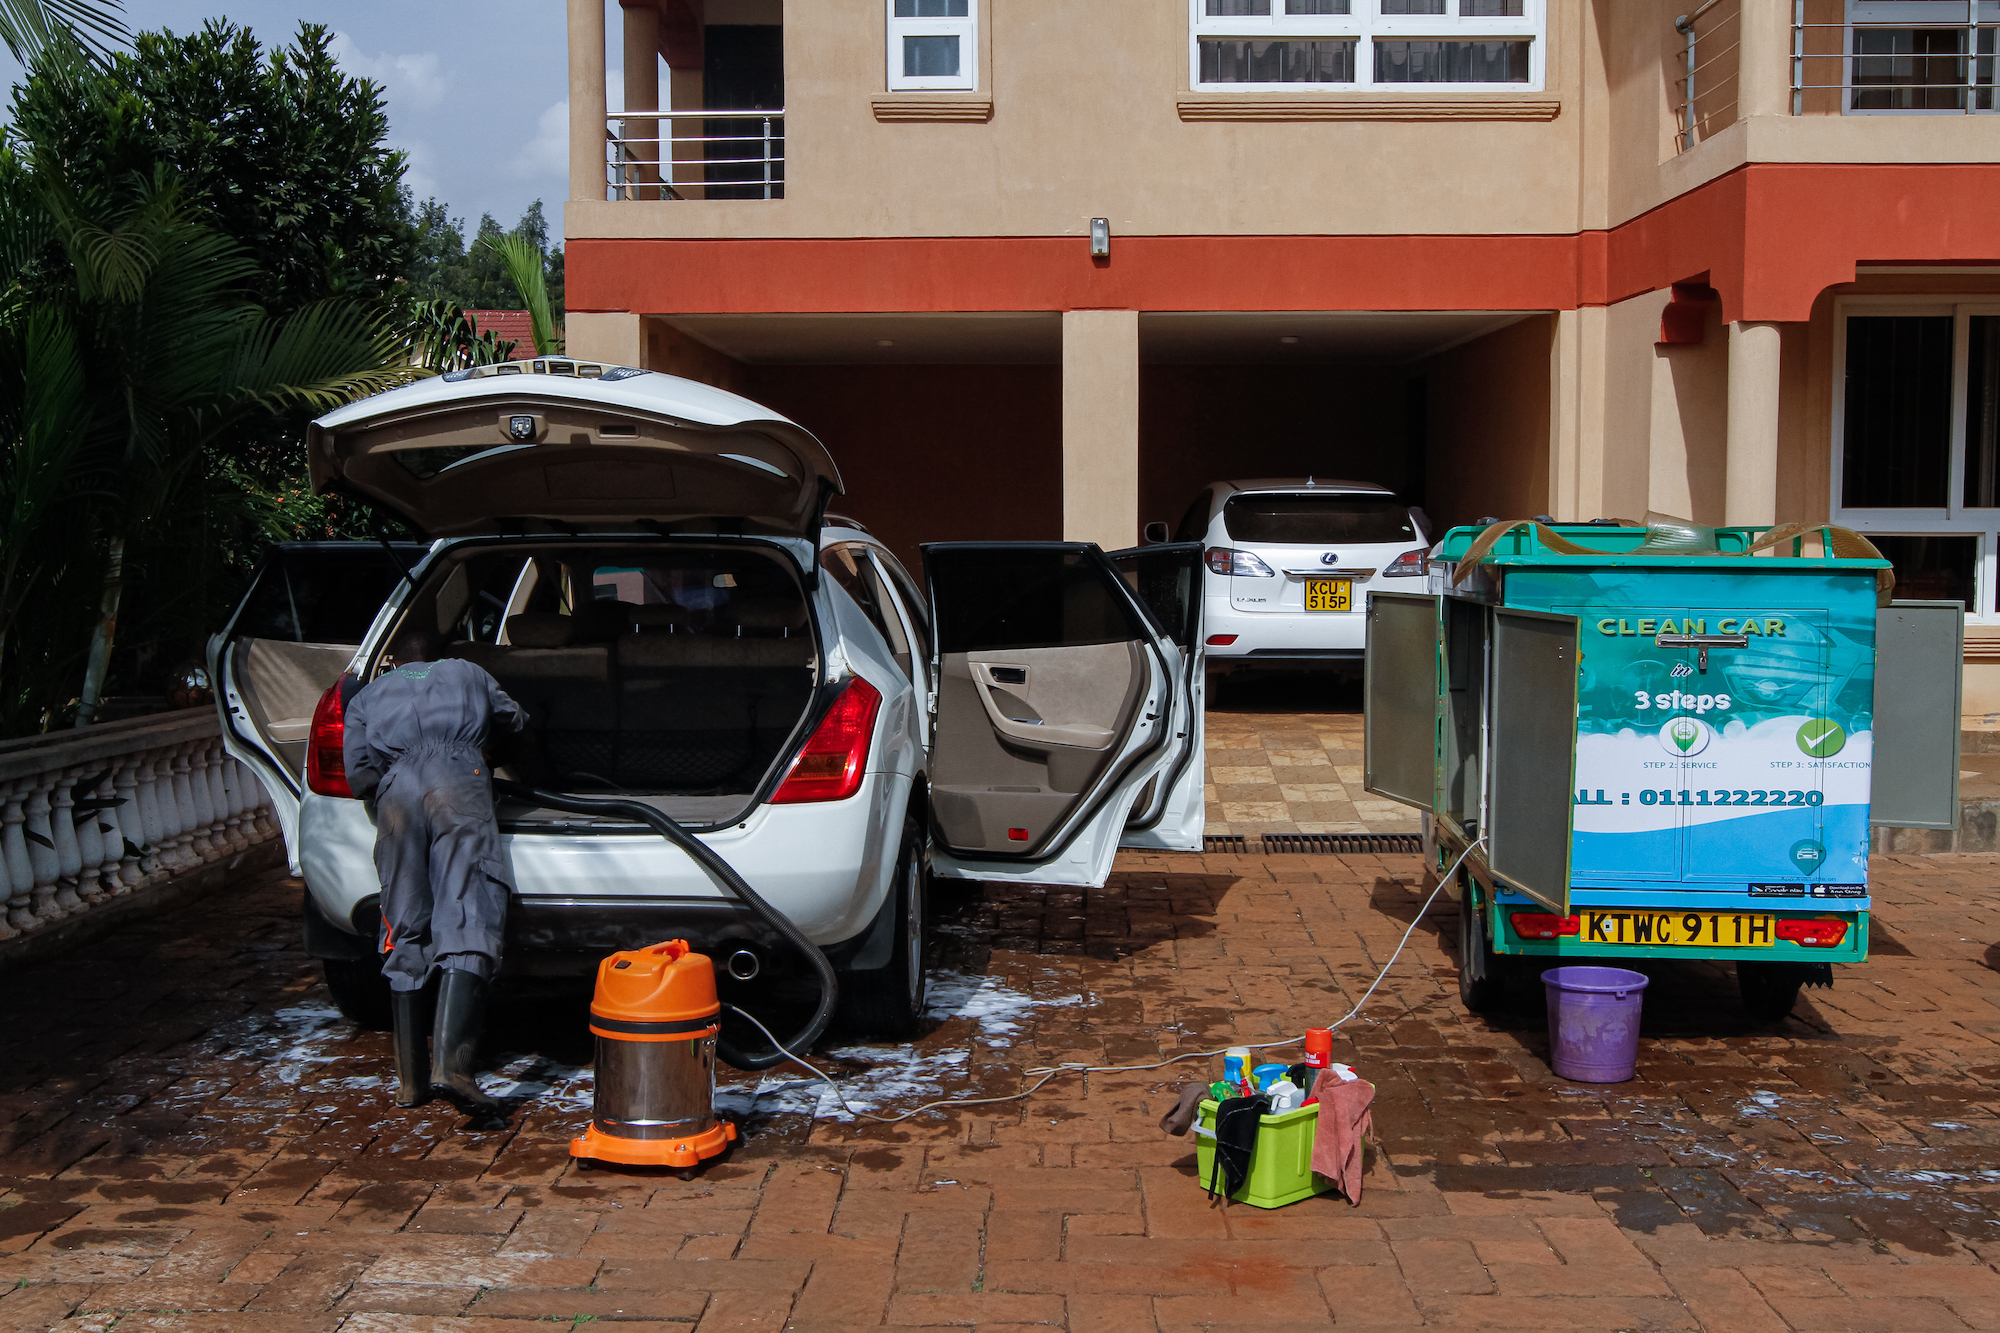 A mobile car wash worker uses a shop vac to vacuum the back of an SUV in a customer's front yard